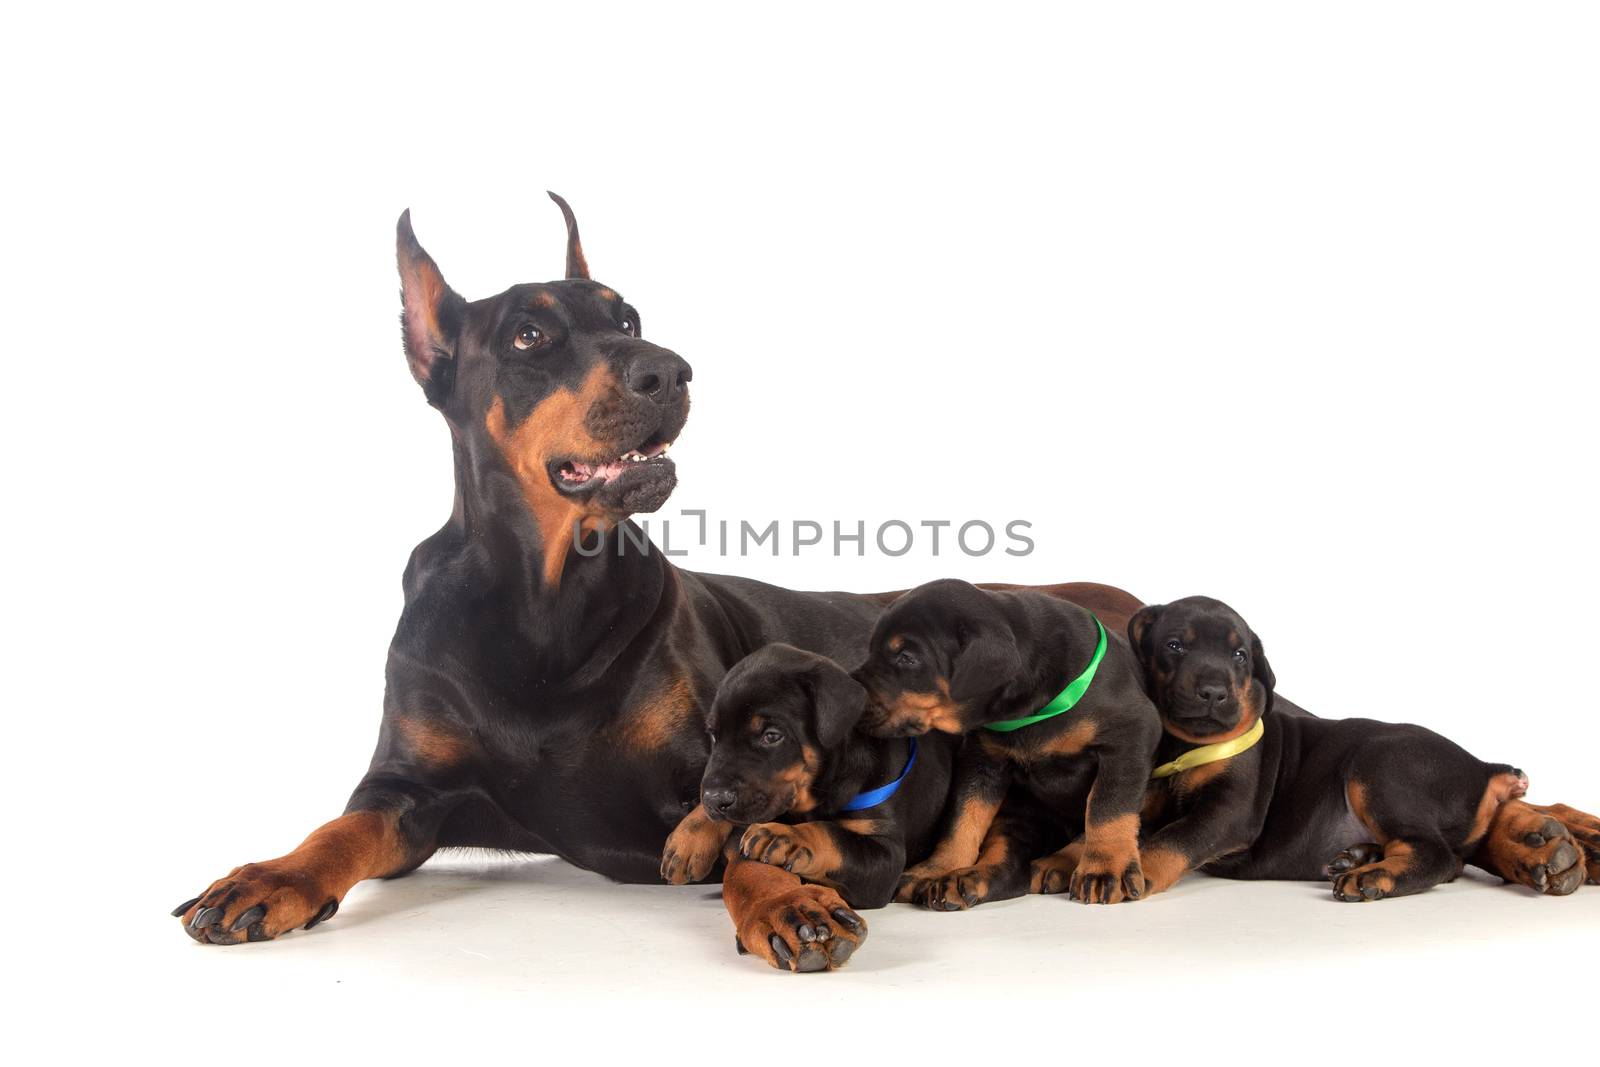 Doberman dog with puppies by gsdonlin